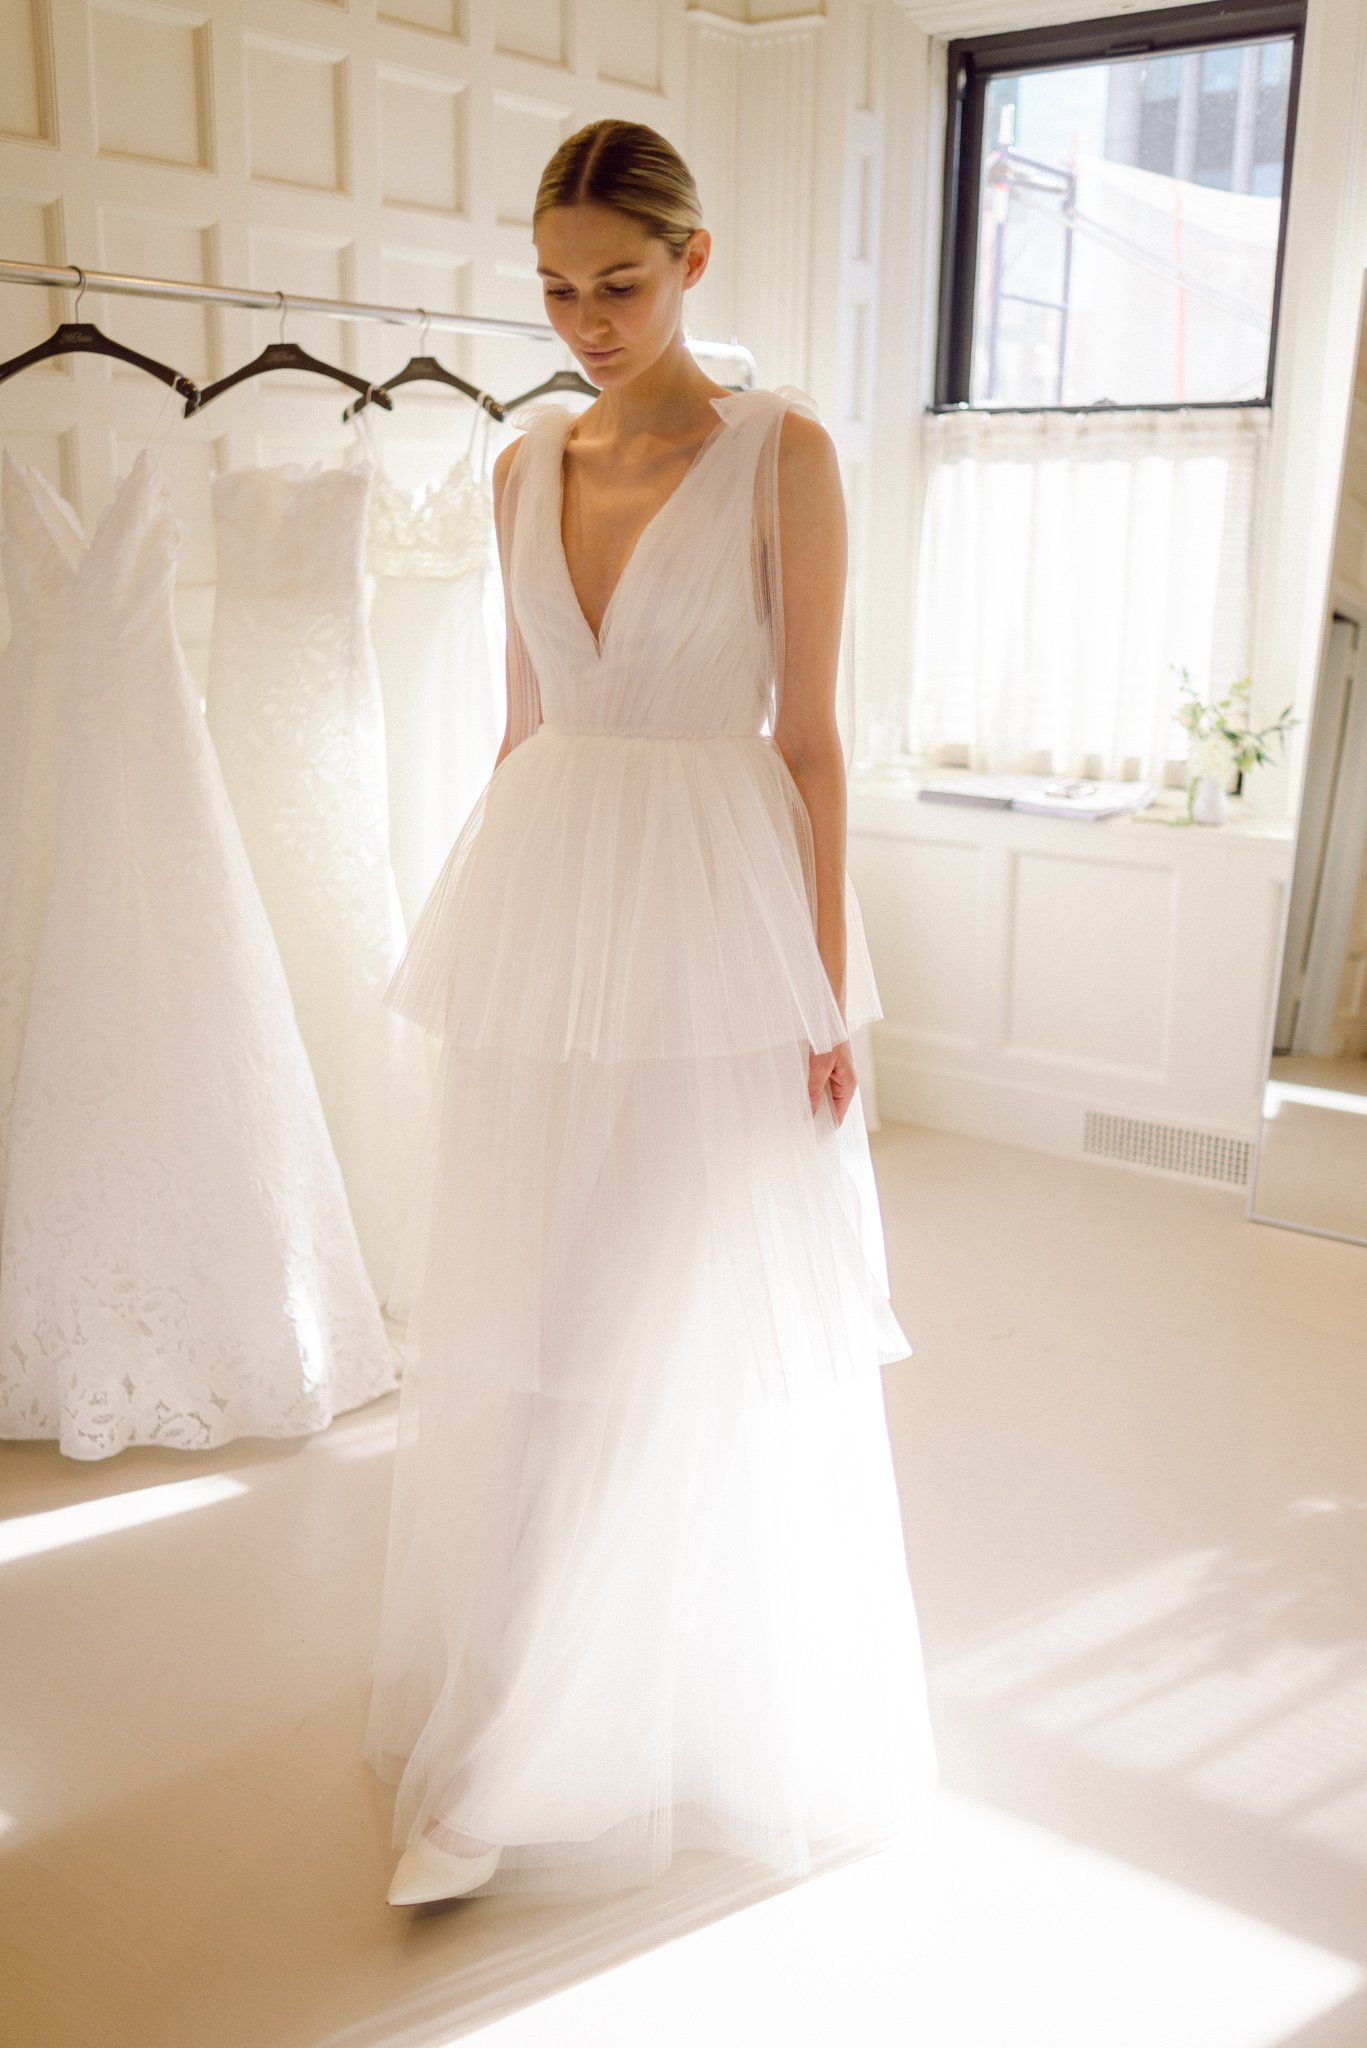 Lela Rose "The Madison" Gown